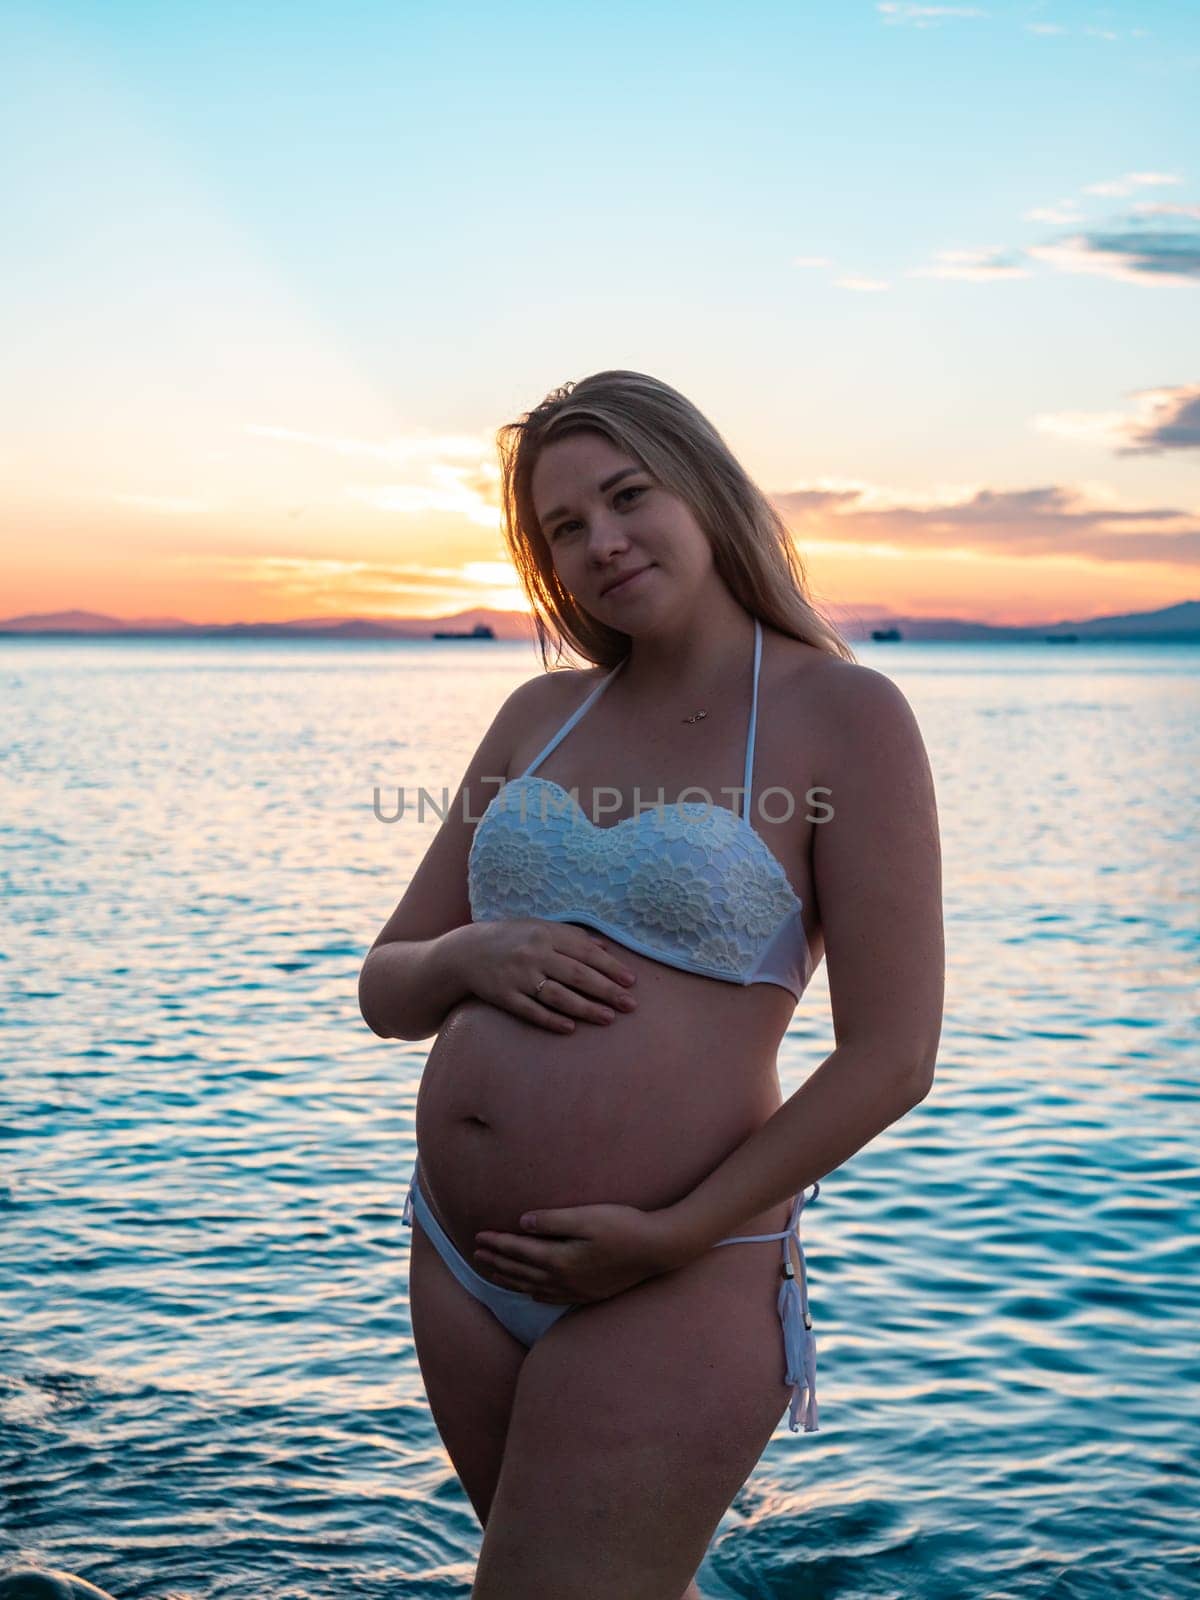 Pregnant woman in bikini posing on rocky beach at sunrise with mountain view by Busker